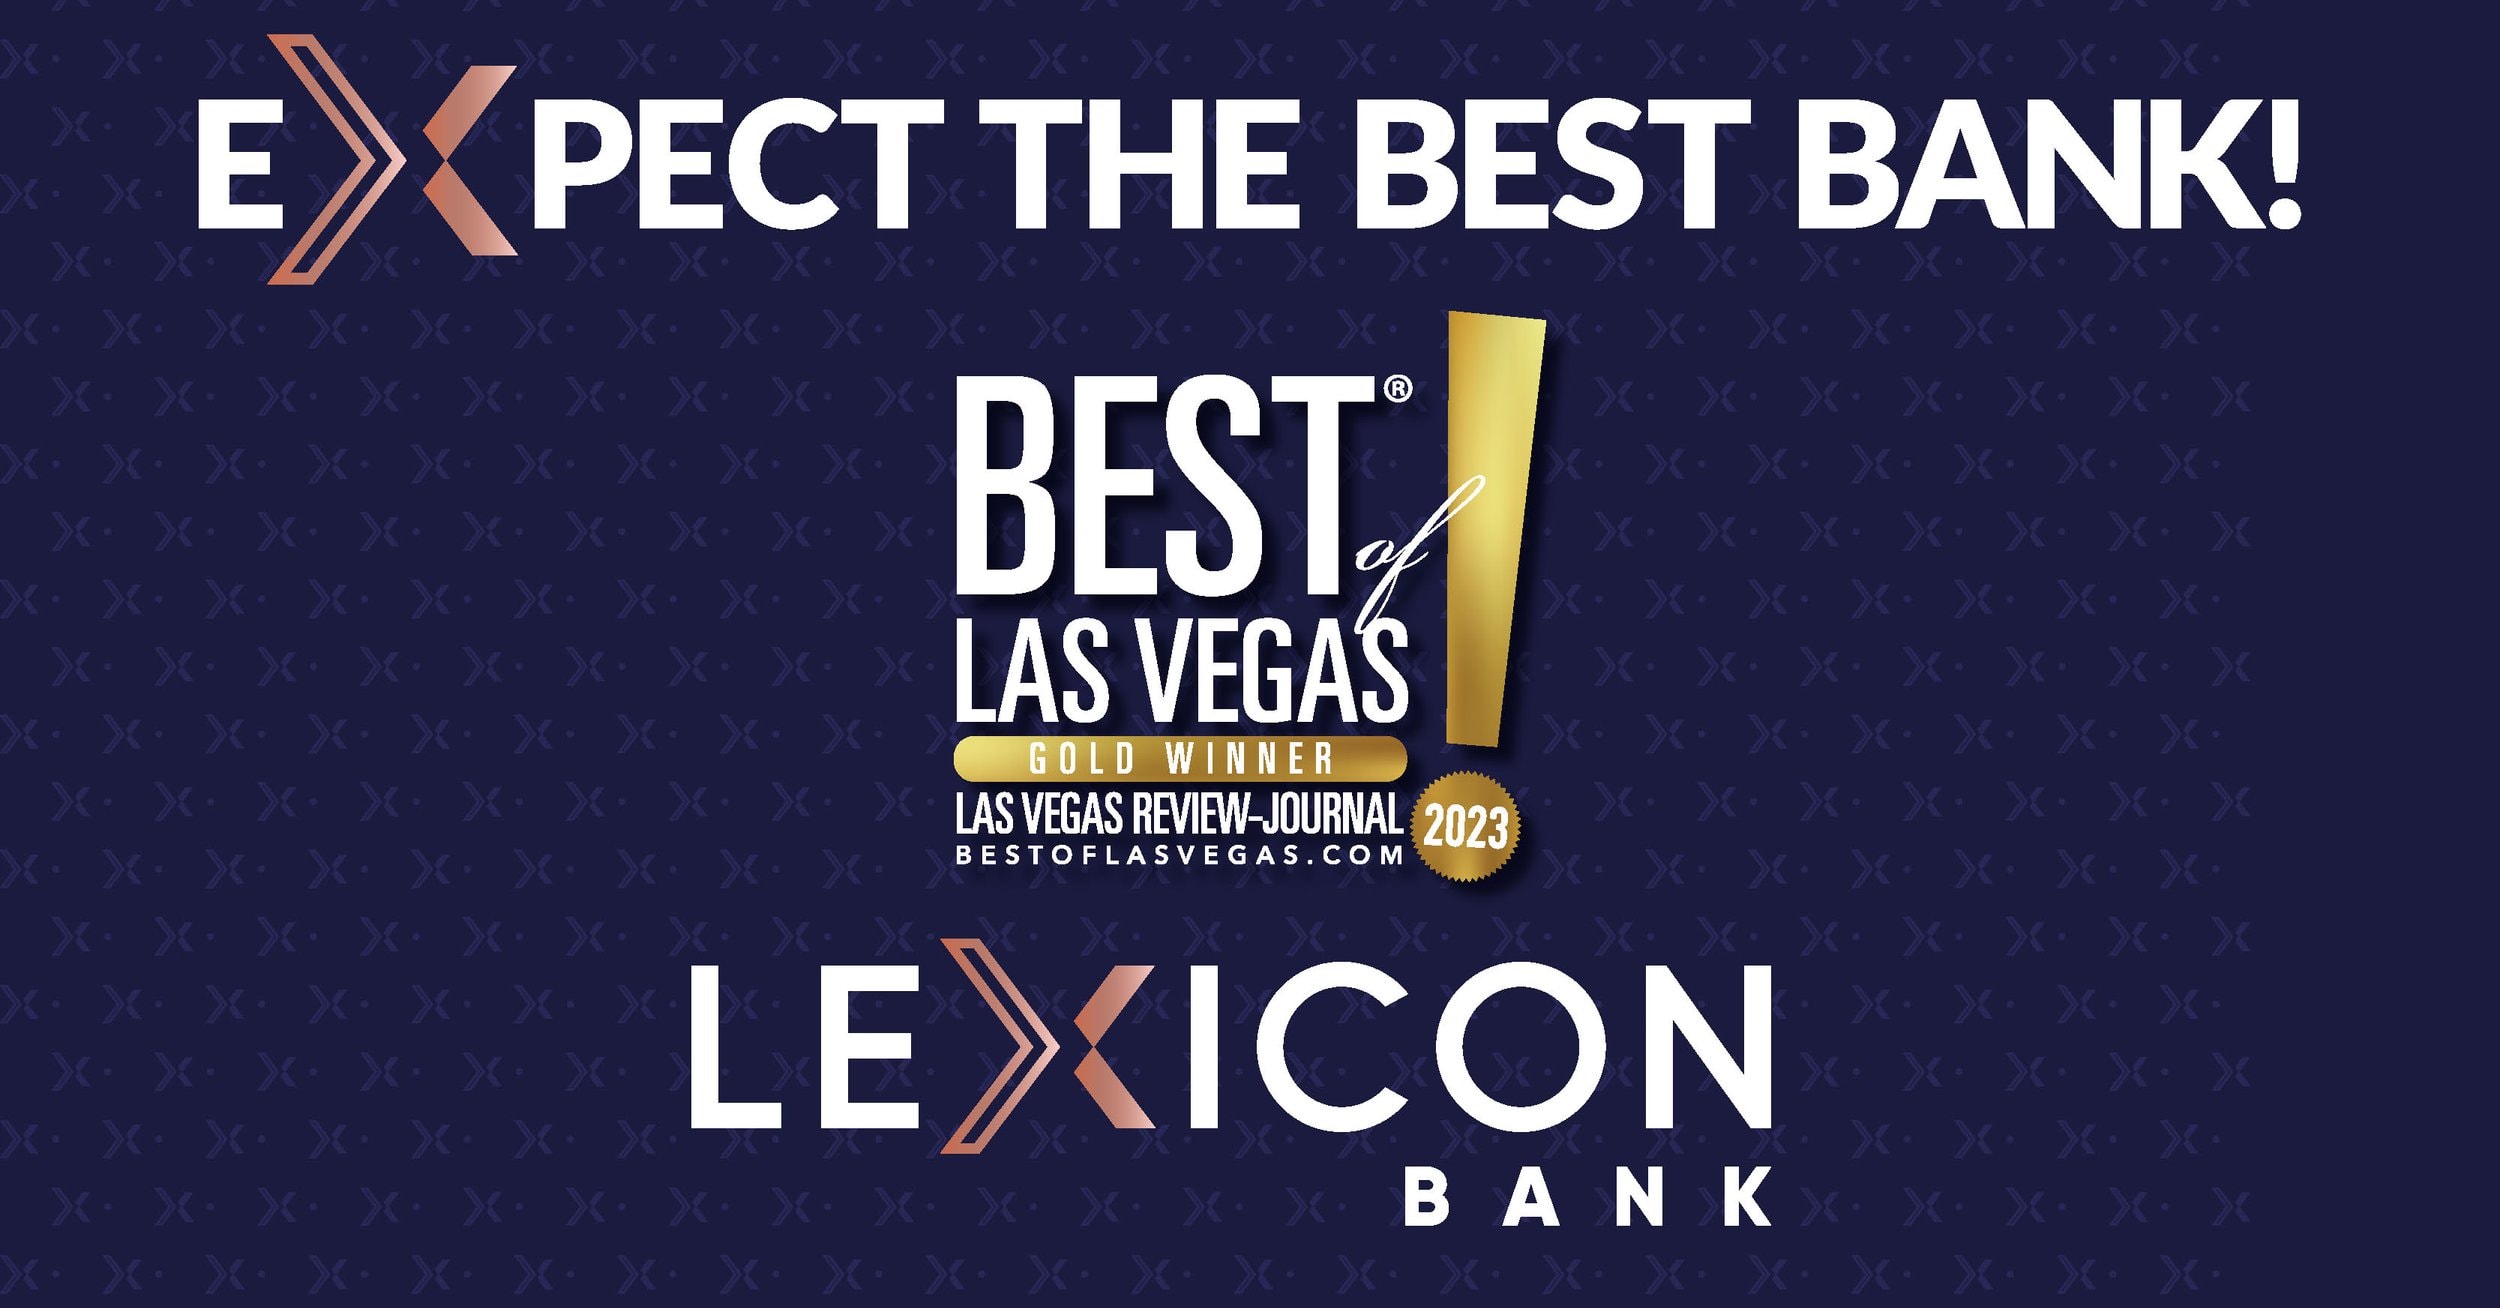 News – Lexicon Bank Wins Golds in Best of Las Vegas